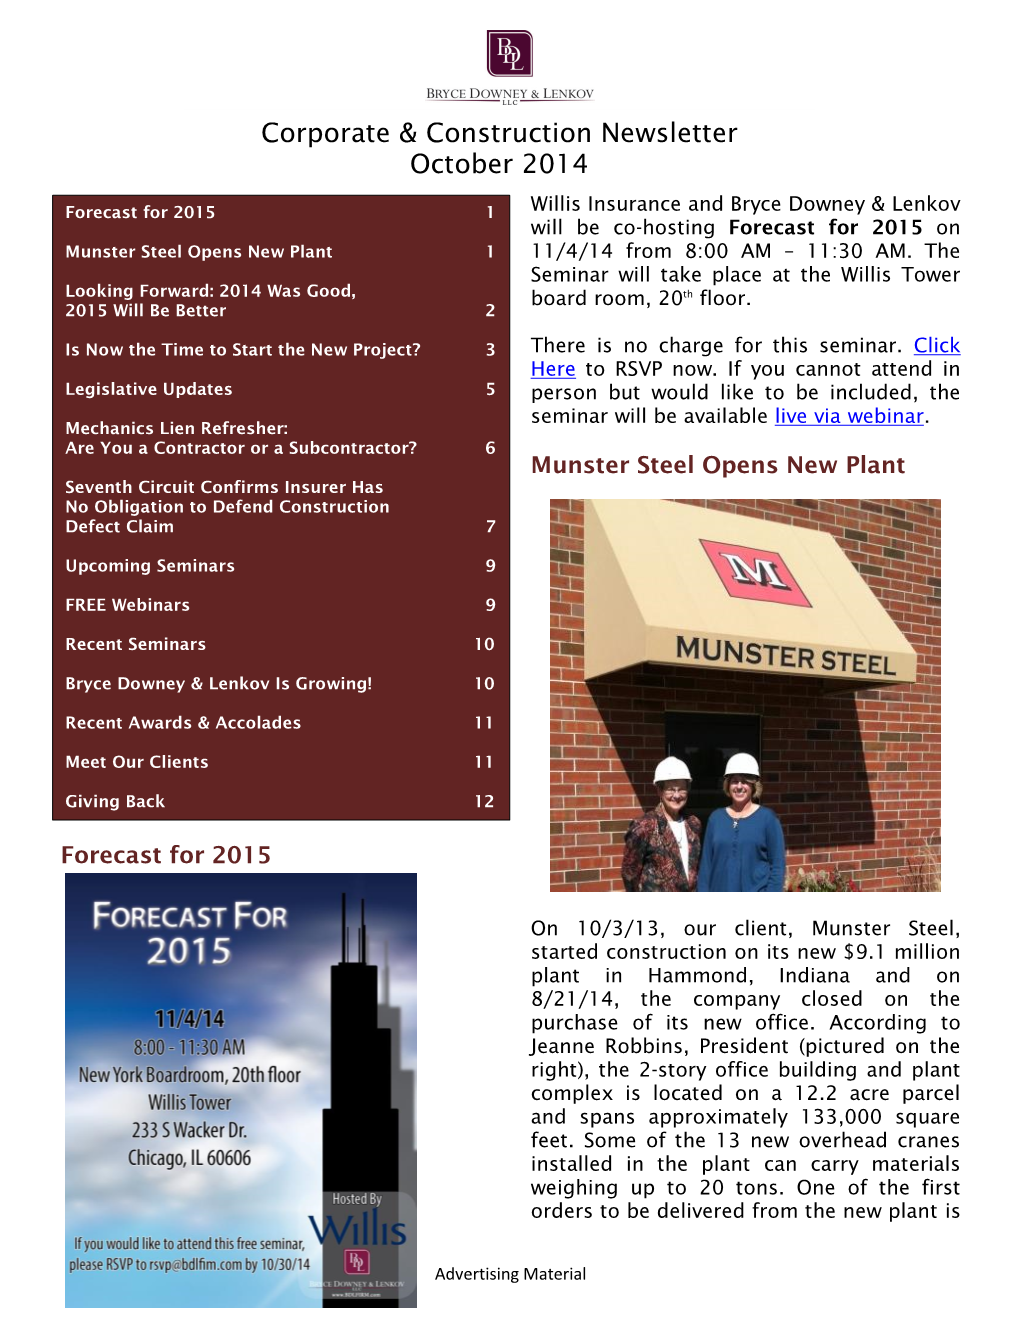 Corporate & Construction Newsletter October 2014